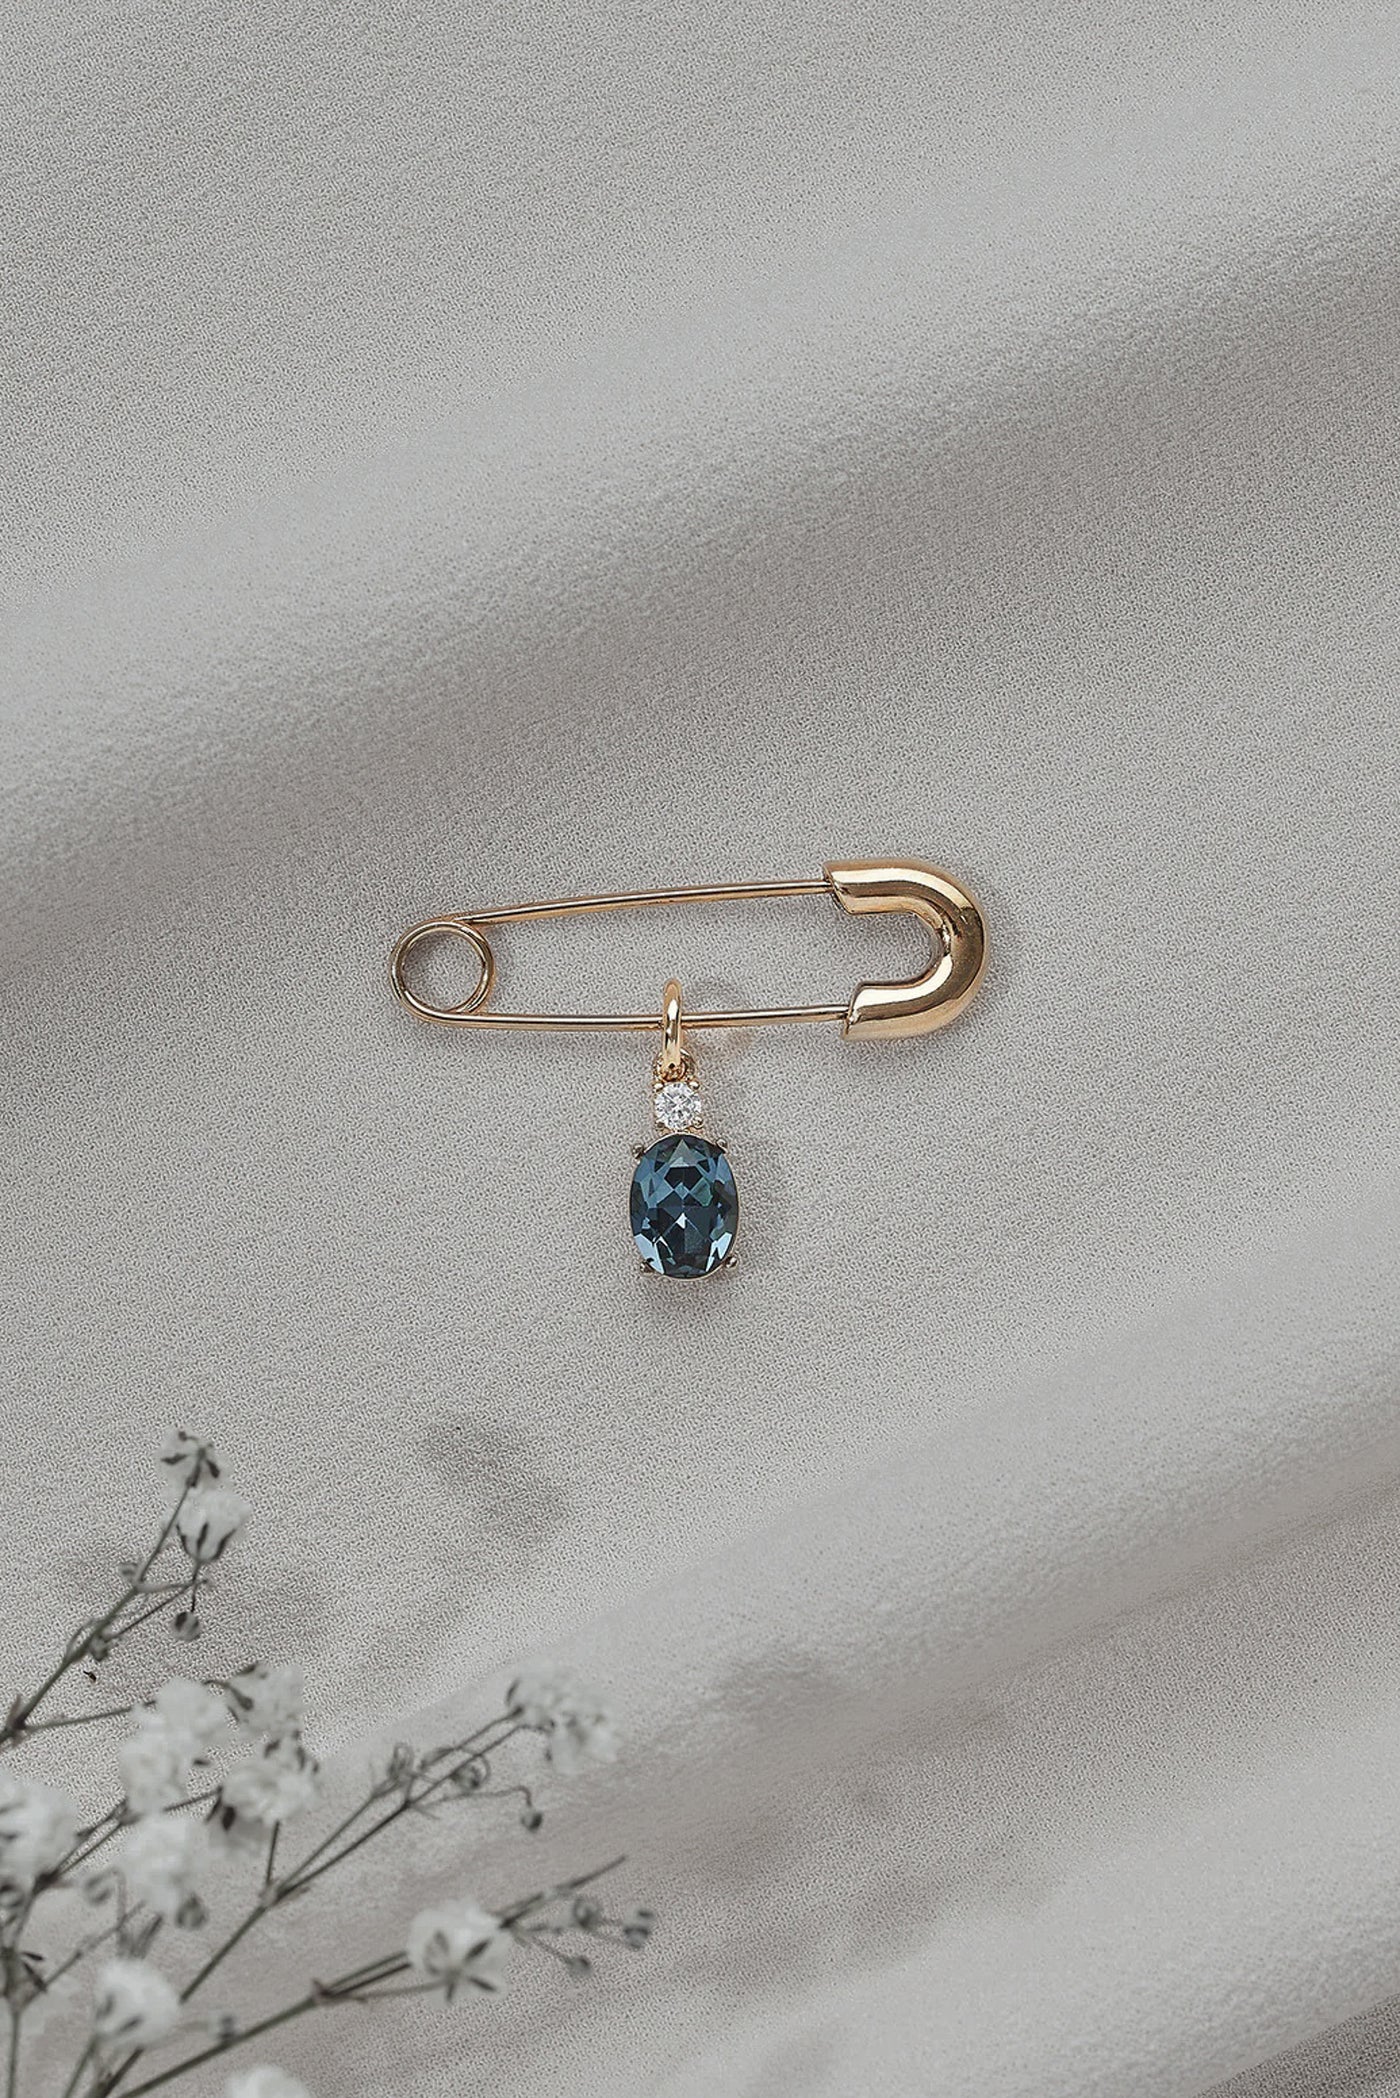 A basic shot of a gold safety pin with a blue gem attached to it.